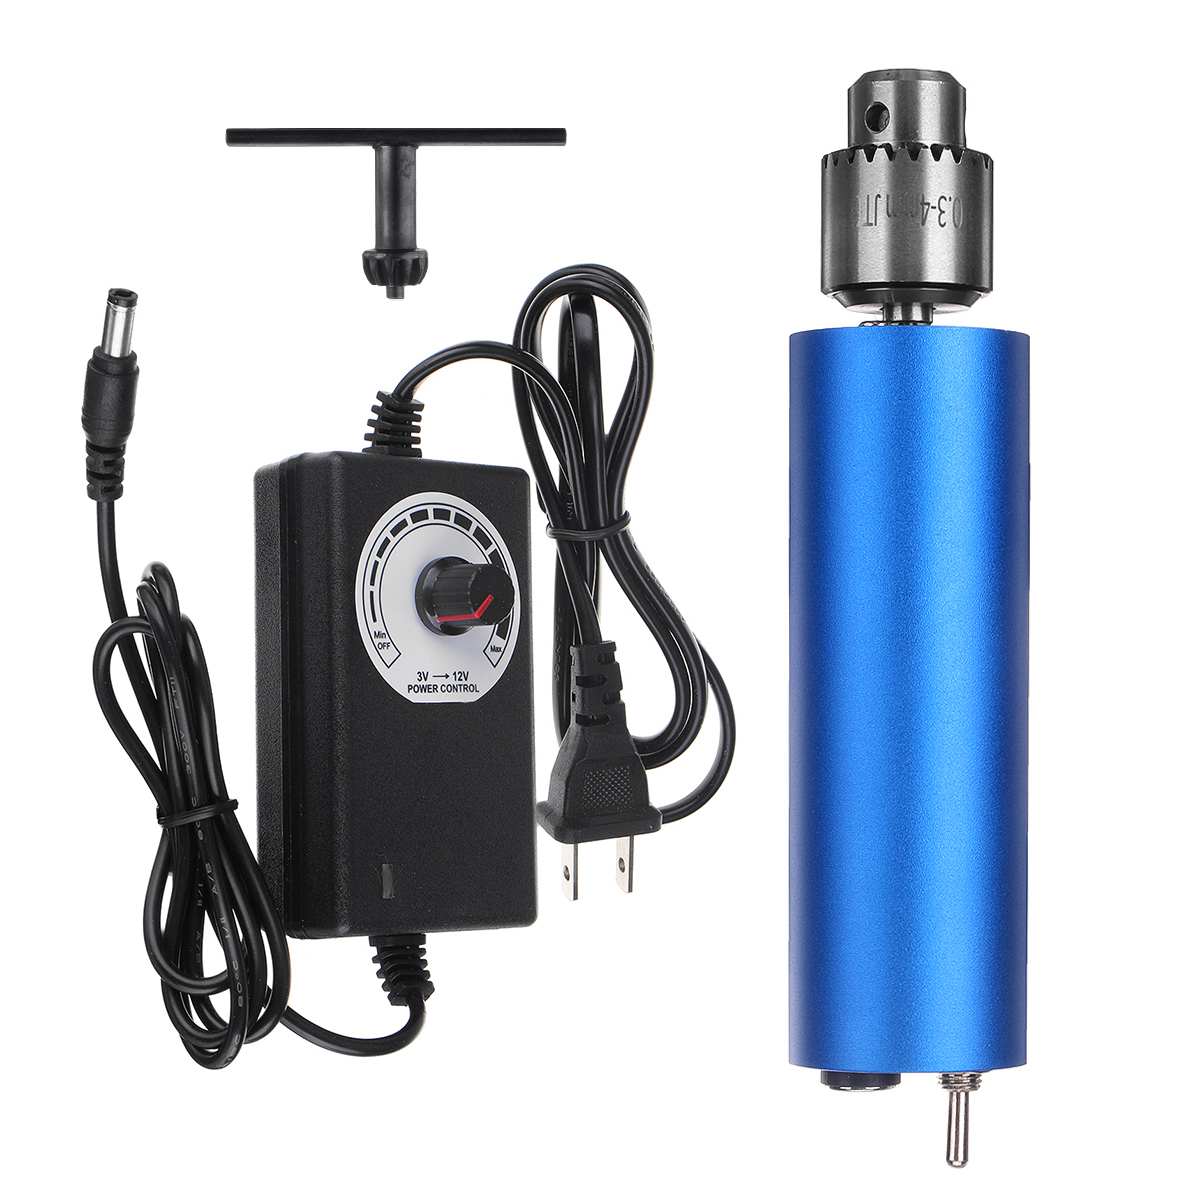 12000RPM mini USB Hand Drill Electric Hand Drills 12V-24V with DIY 385 Ball Bearing Motor JT0 Drill Chuck Small Electric Drills: NO Accessories